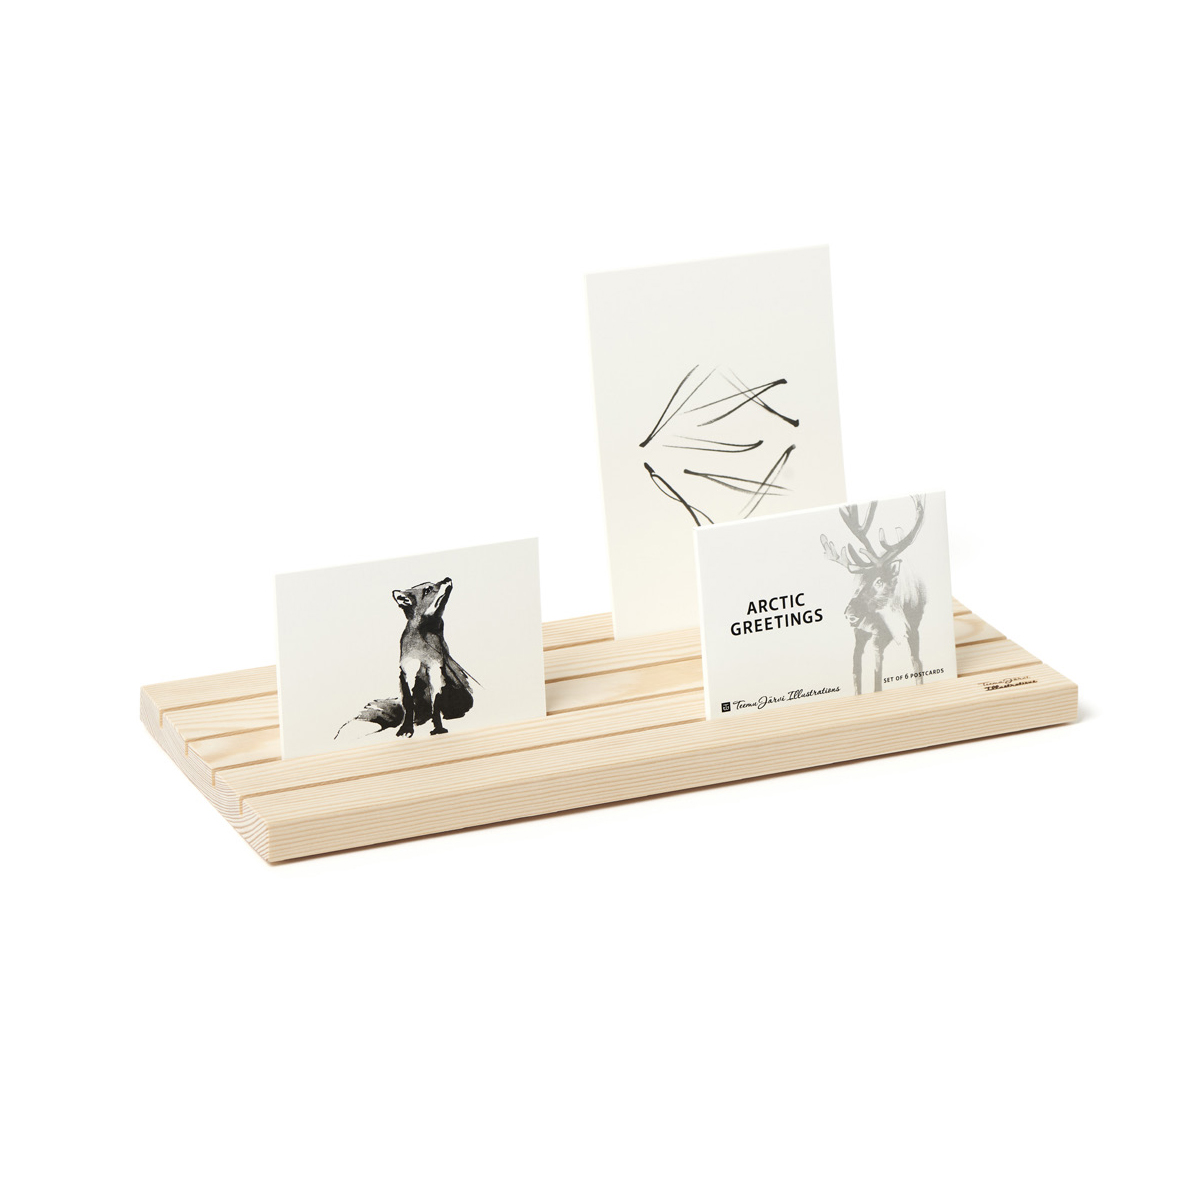 Display stand for cards